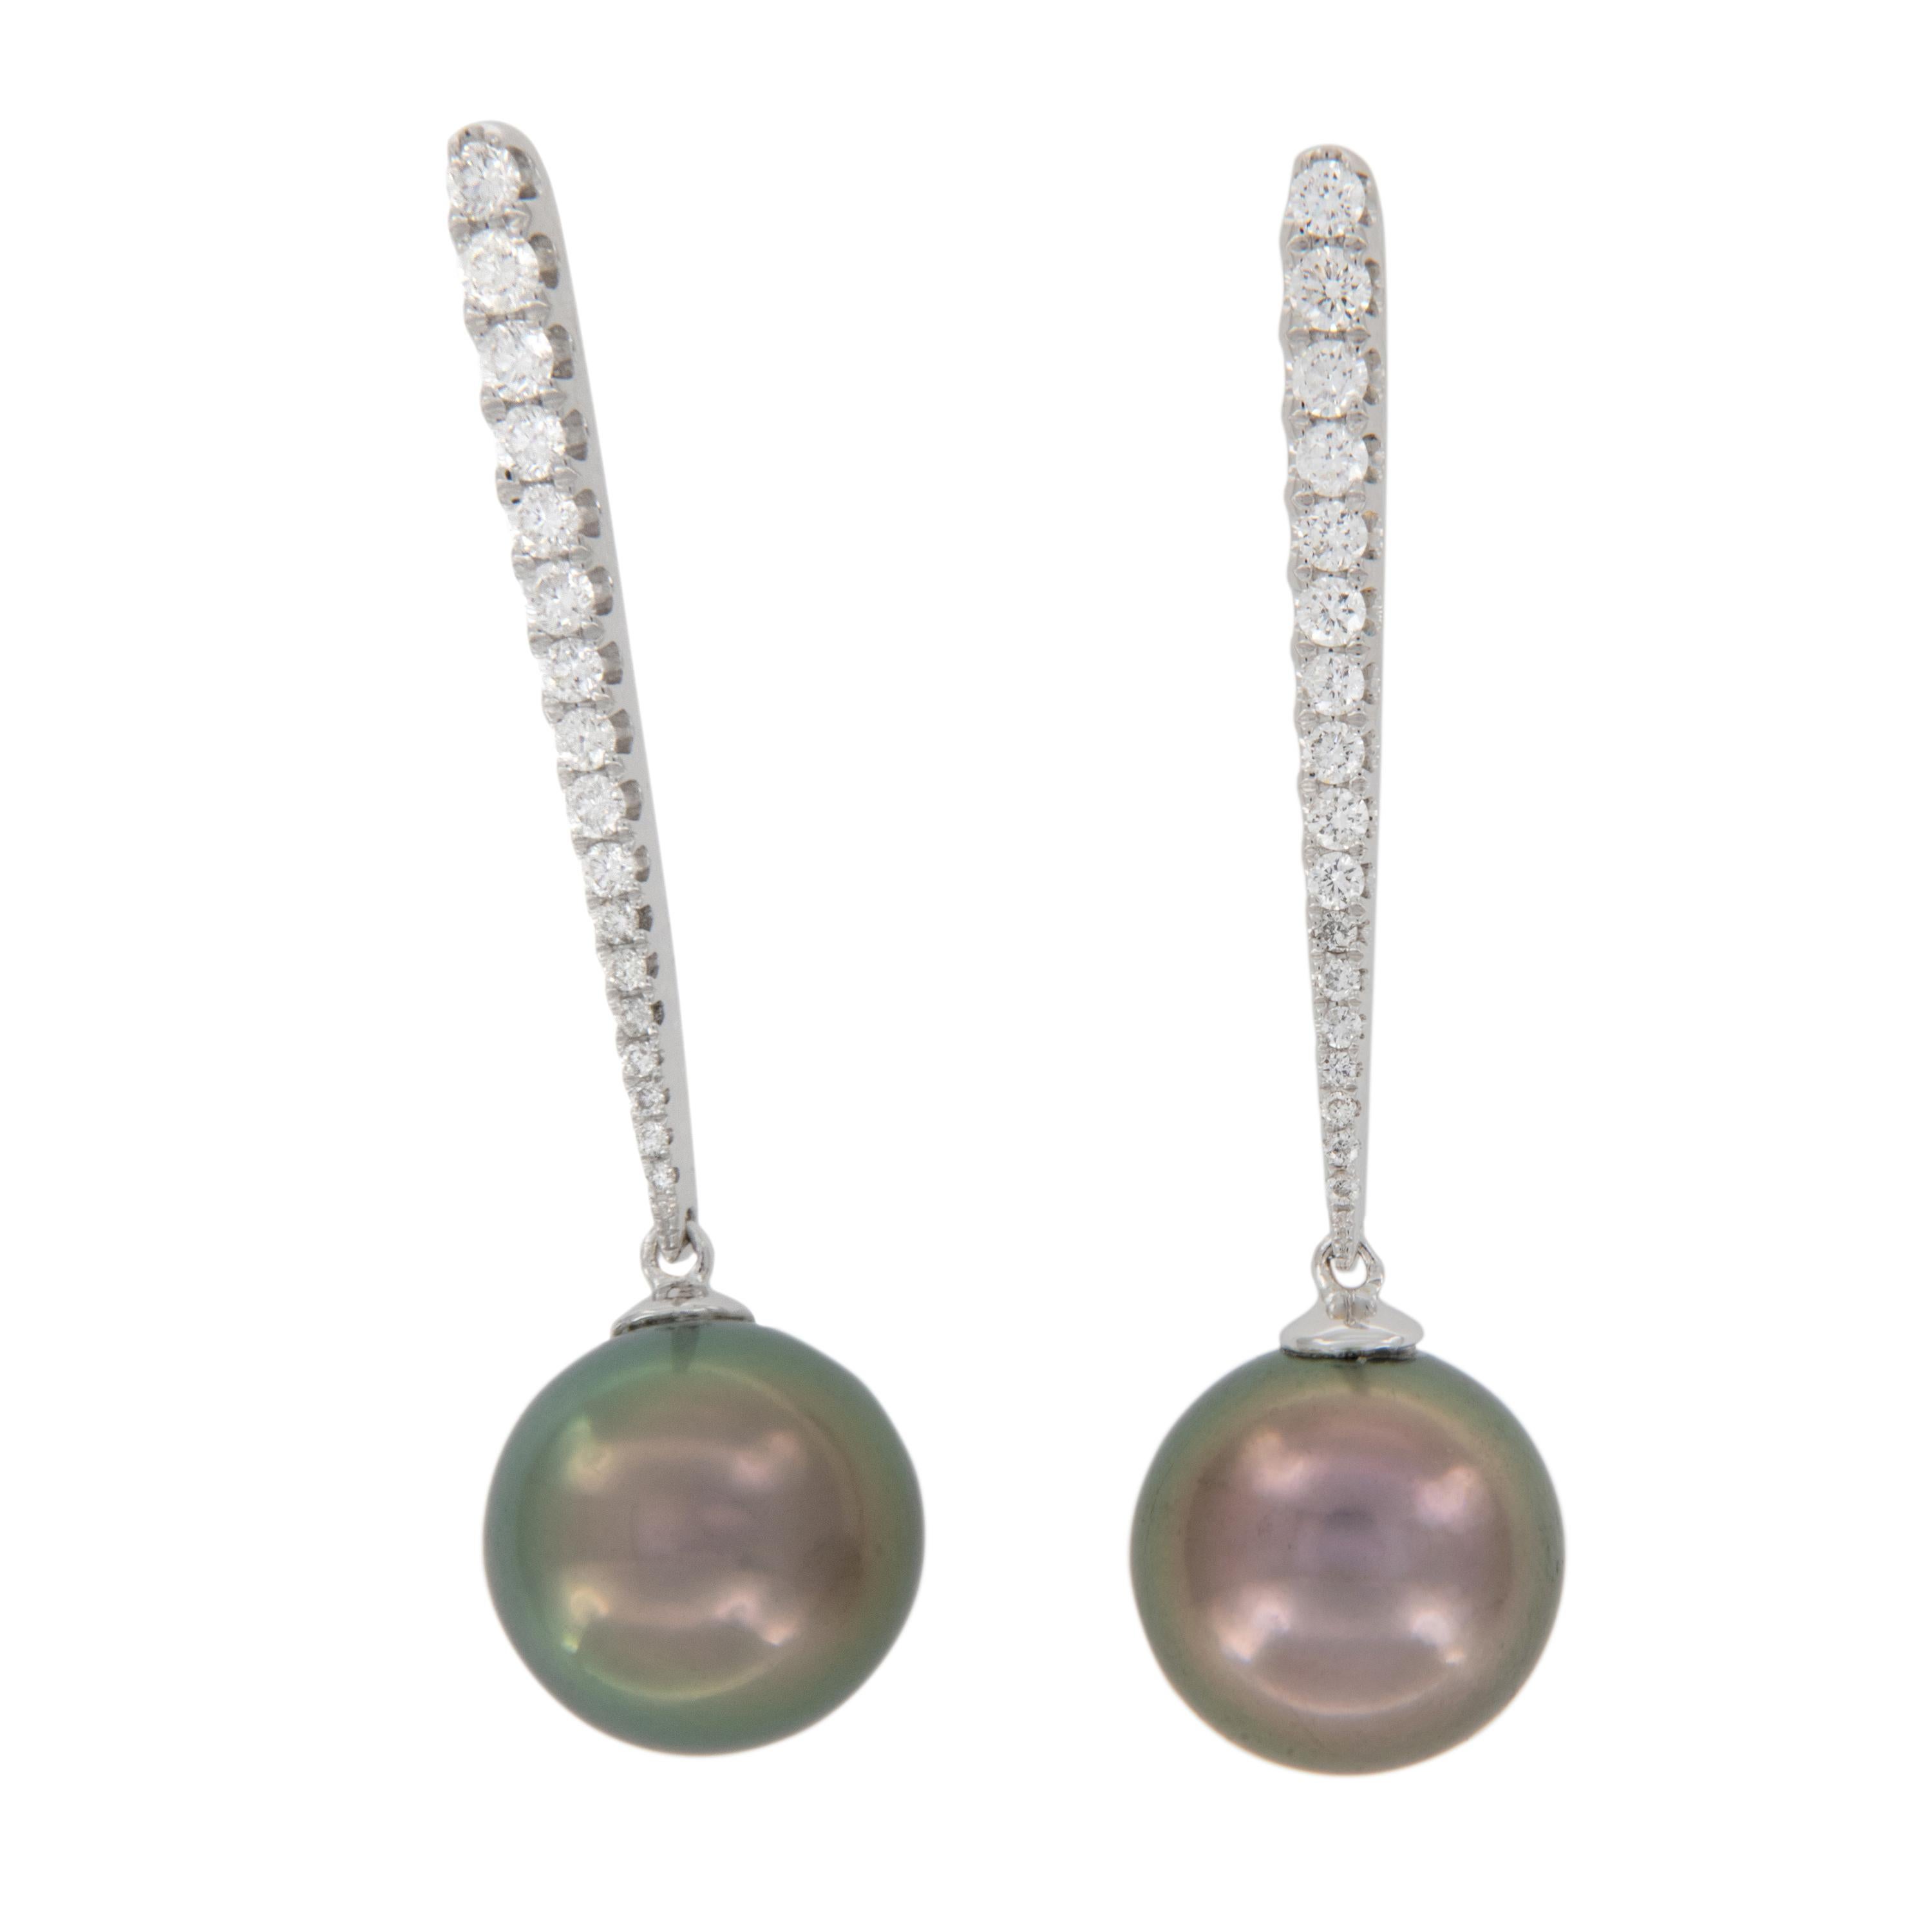 Tahitian pearls are the only natural pearls that have a full color spectrum. The black-lip pearl oysters have a rainbow-like mantle which exhibits all natural colors. These colors are expressed in Tahitian pearls in a magical way with colors